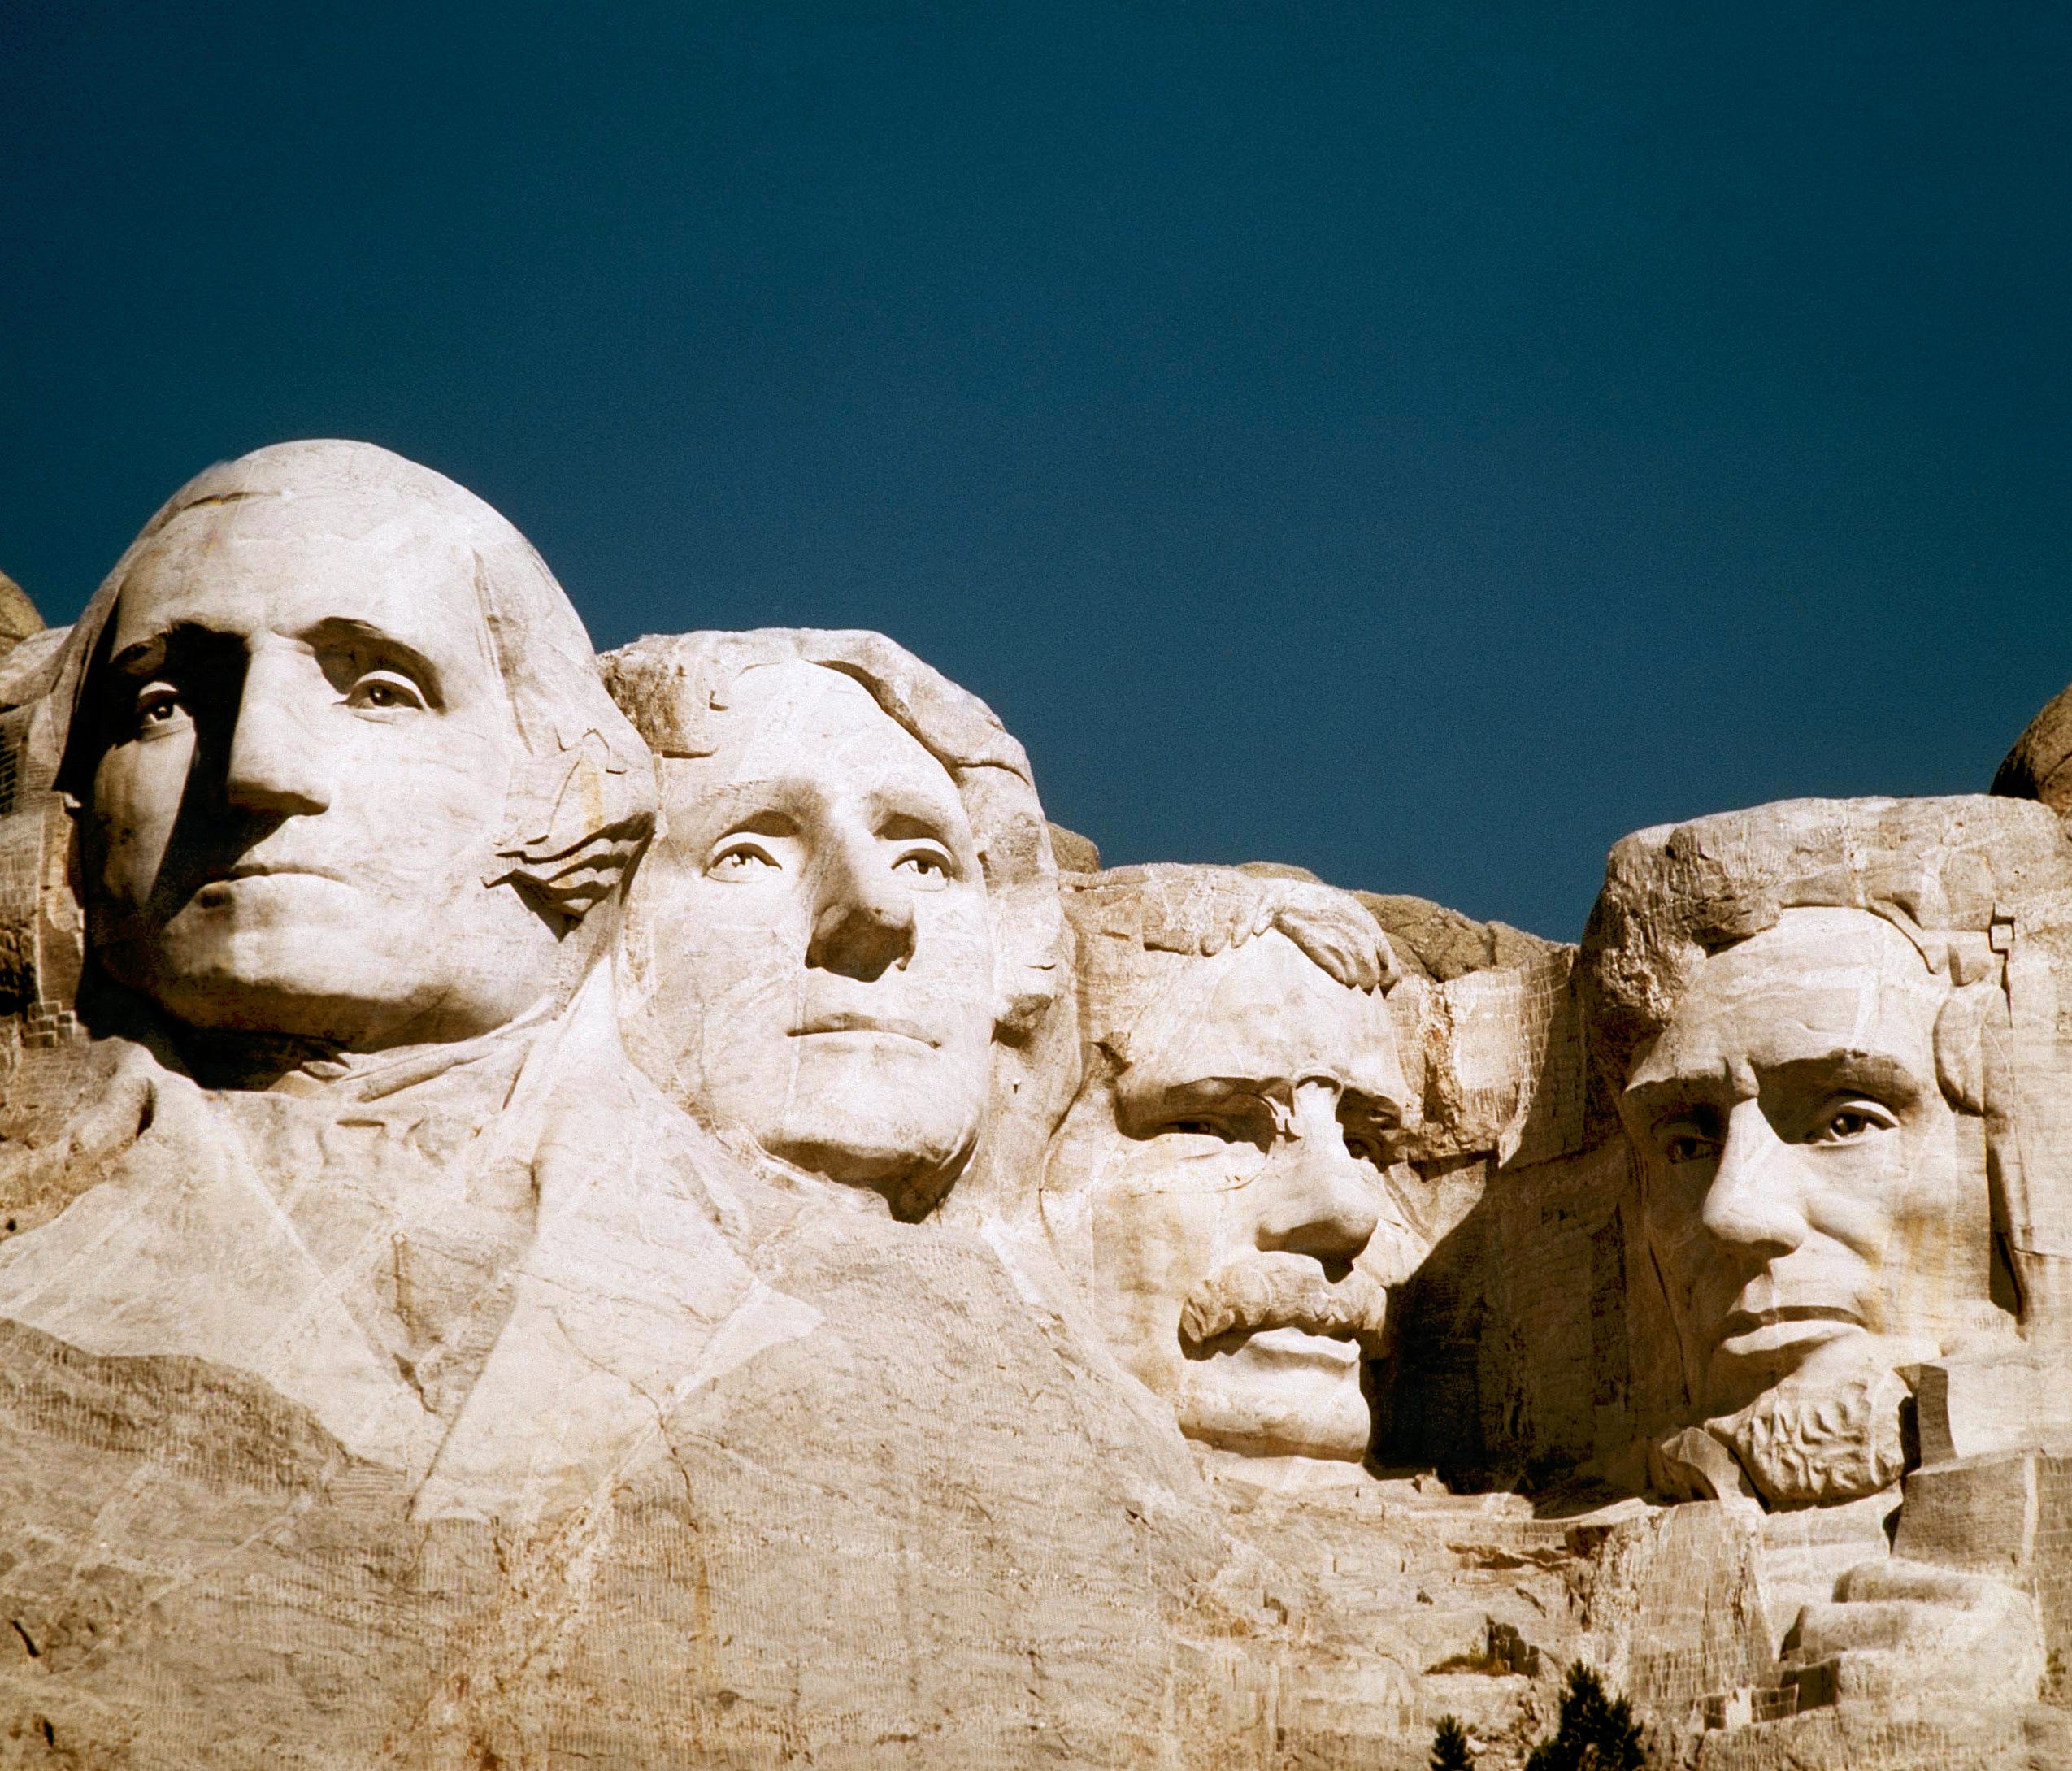 In this undated photo, the statues of George Washington, Thomas Jefferson, Teddy Roosevelt and Abraham Lincoln are shown at Mount Rushmore in South Dakota.